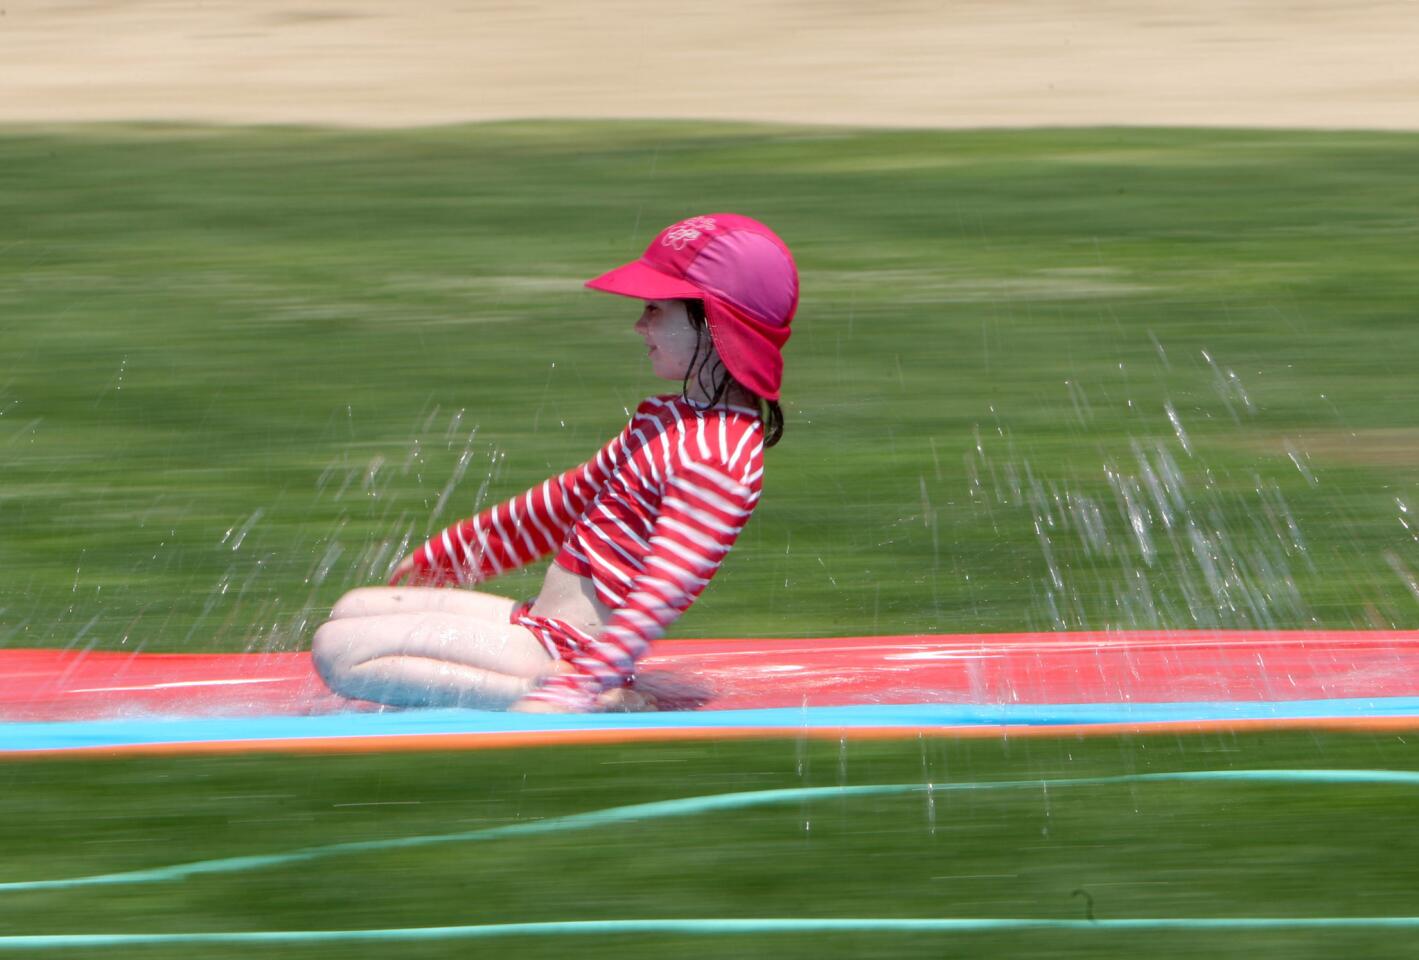 Camp Runamuk participant Ava Blair slides along a slippery wet slide during water play at the Community Center of La Cañada Flintridge in La Cañada Flintridge on Tuesday, June 21, 2016. Children had wet activities for about one hour.